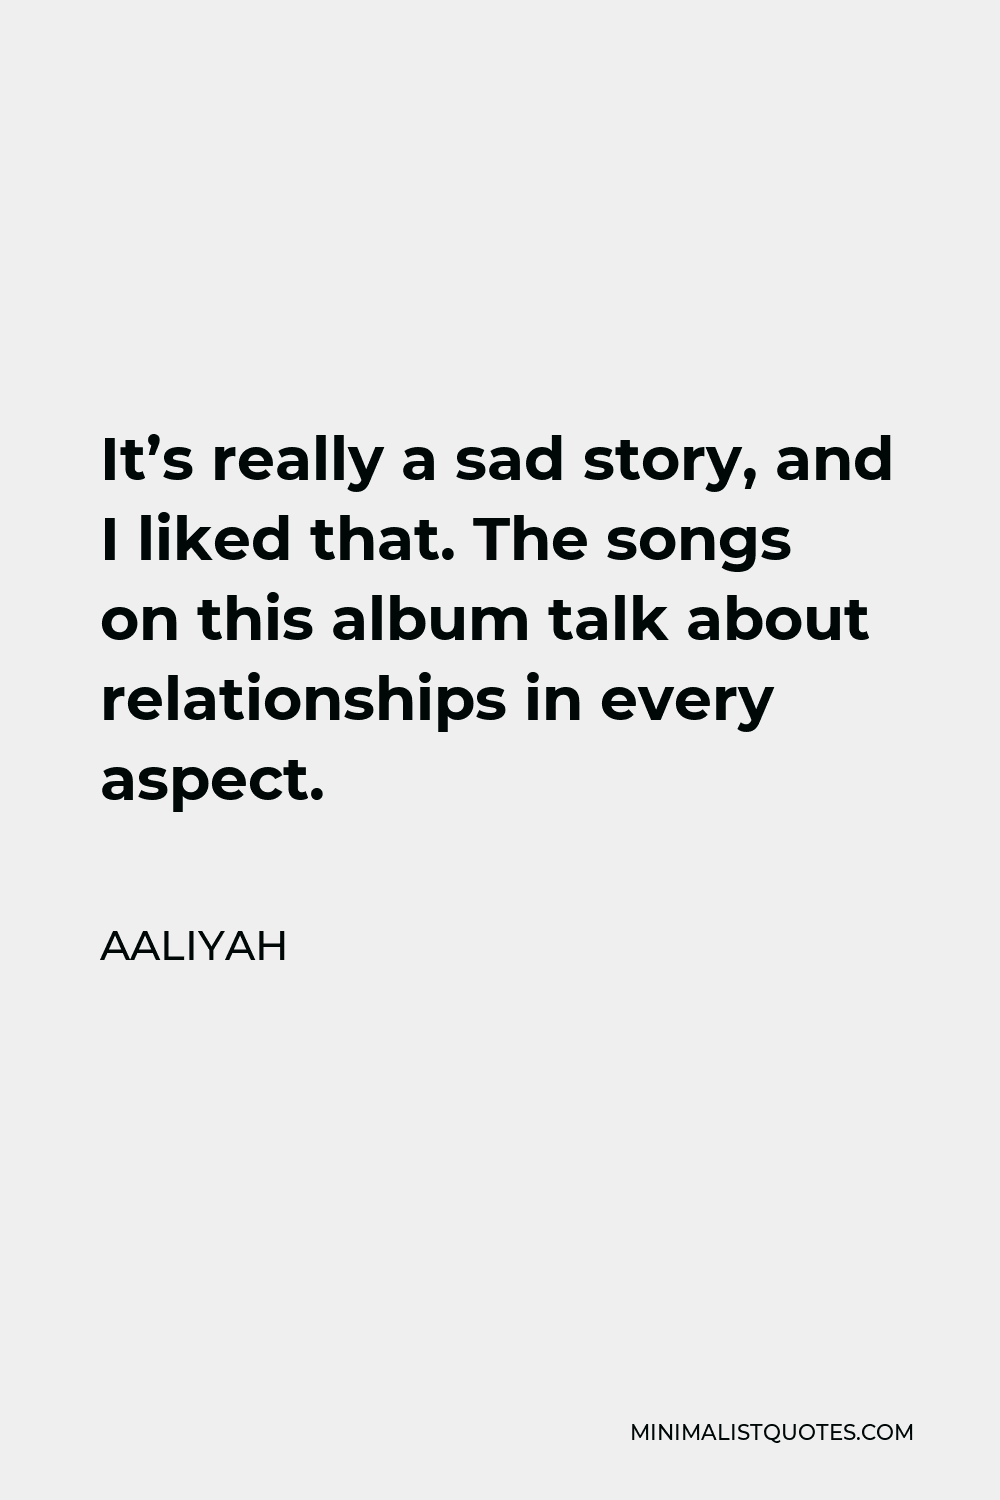 Aaliyah Quote - It’s really a sad story, and I liked that. The songs on this album talk about relationships in every aspect.